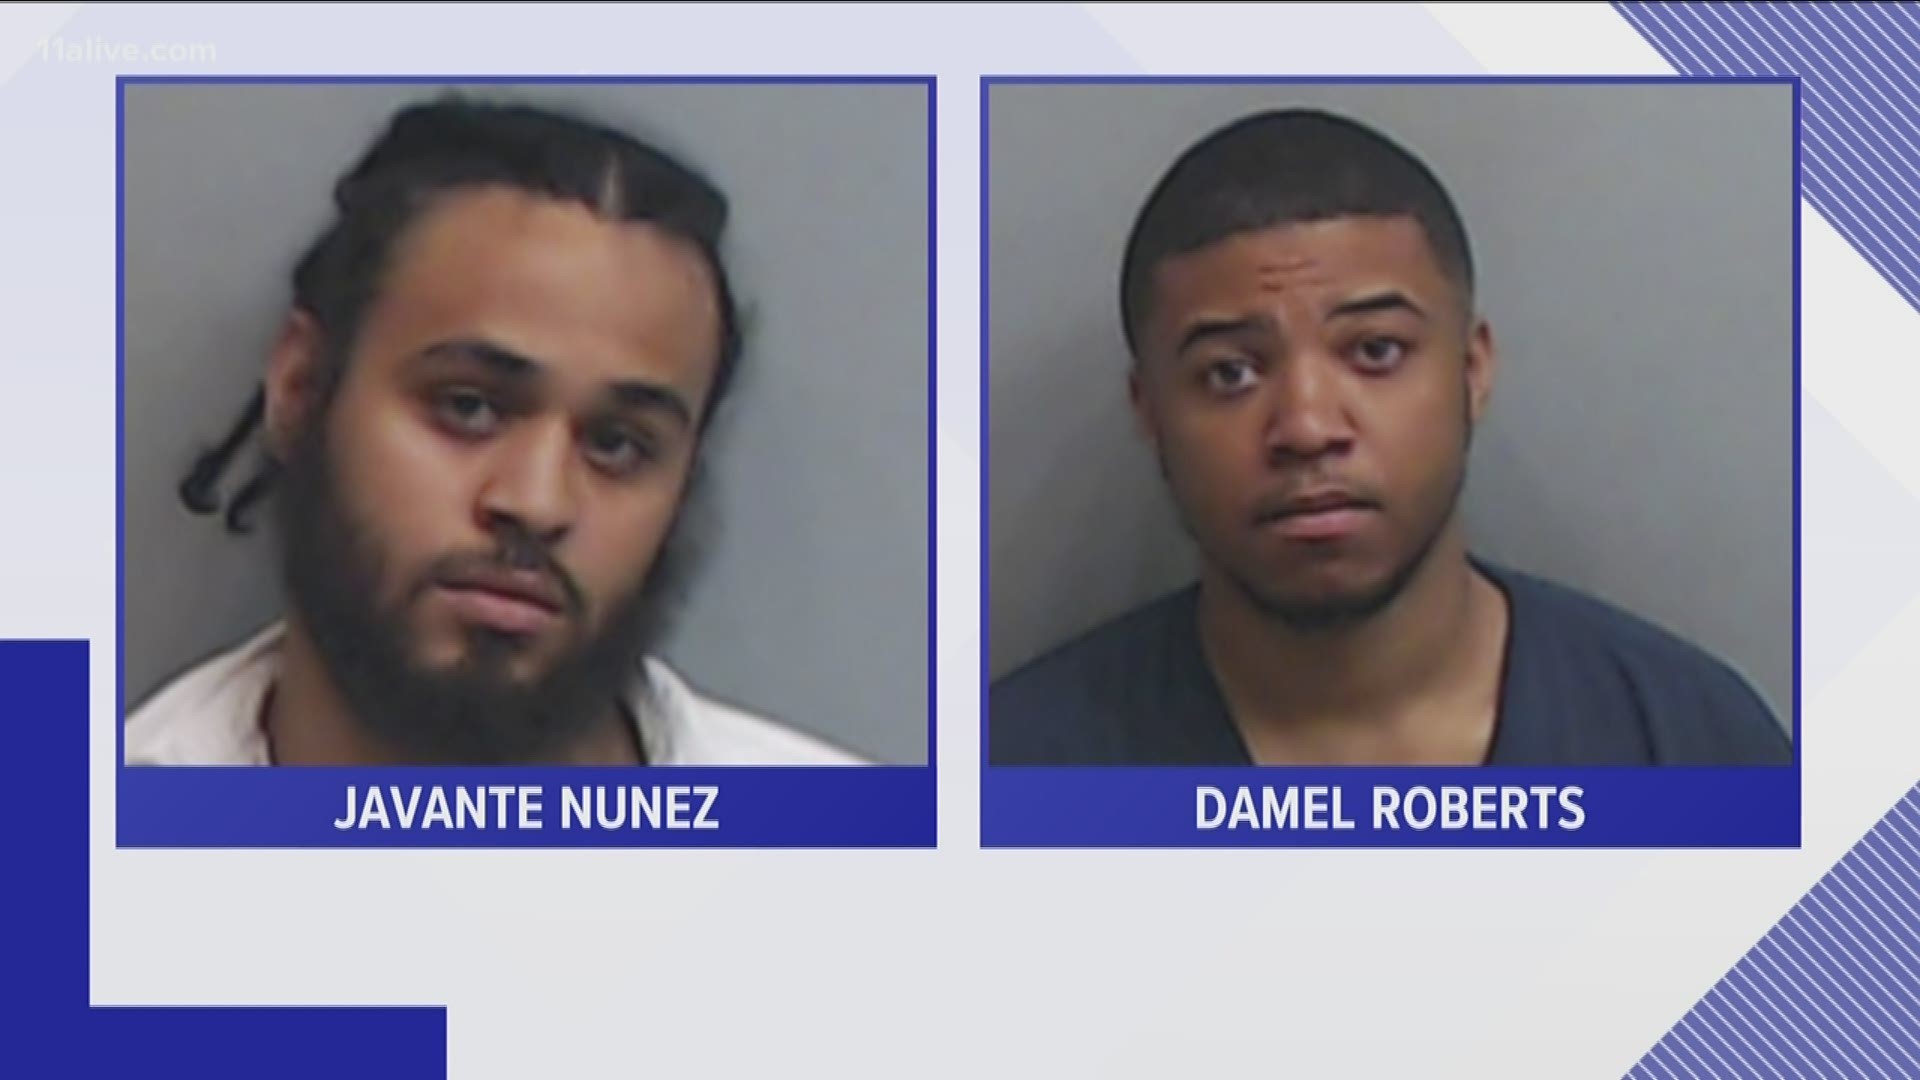 Two of the defendants, 23-year-old Javante Nunez and 23-year-old Damel Roberts, received two consecutive life sentences.